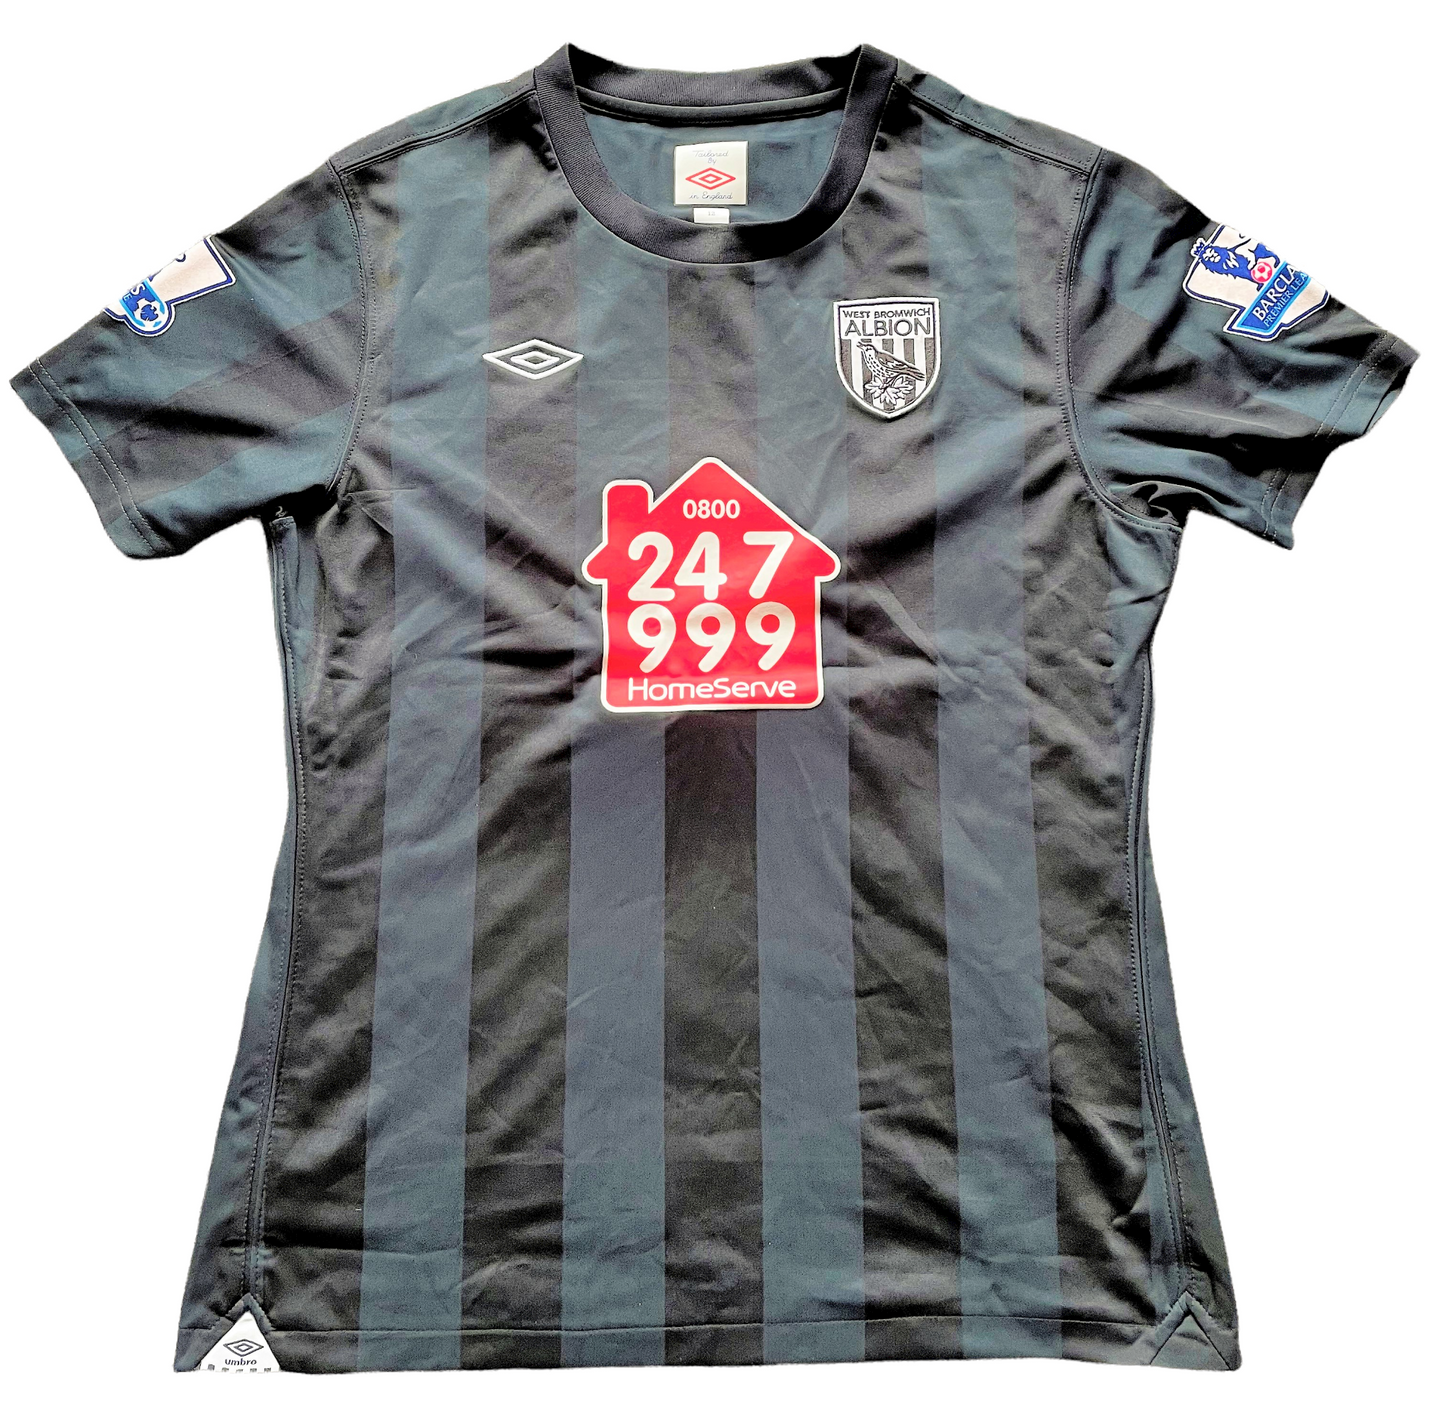 2010-11 West Brom Away Shirt (excellent) Ladies size 12